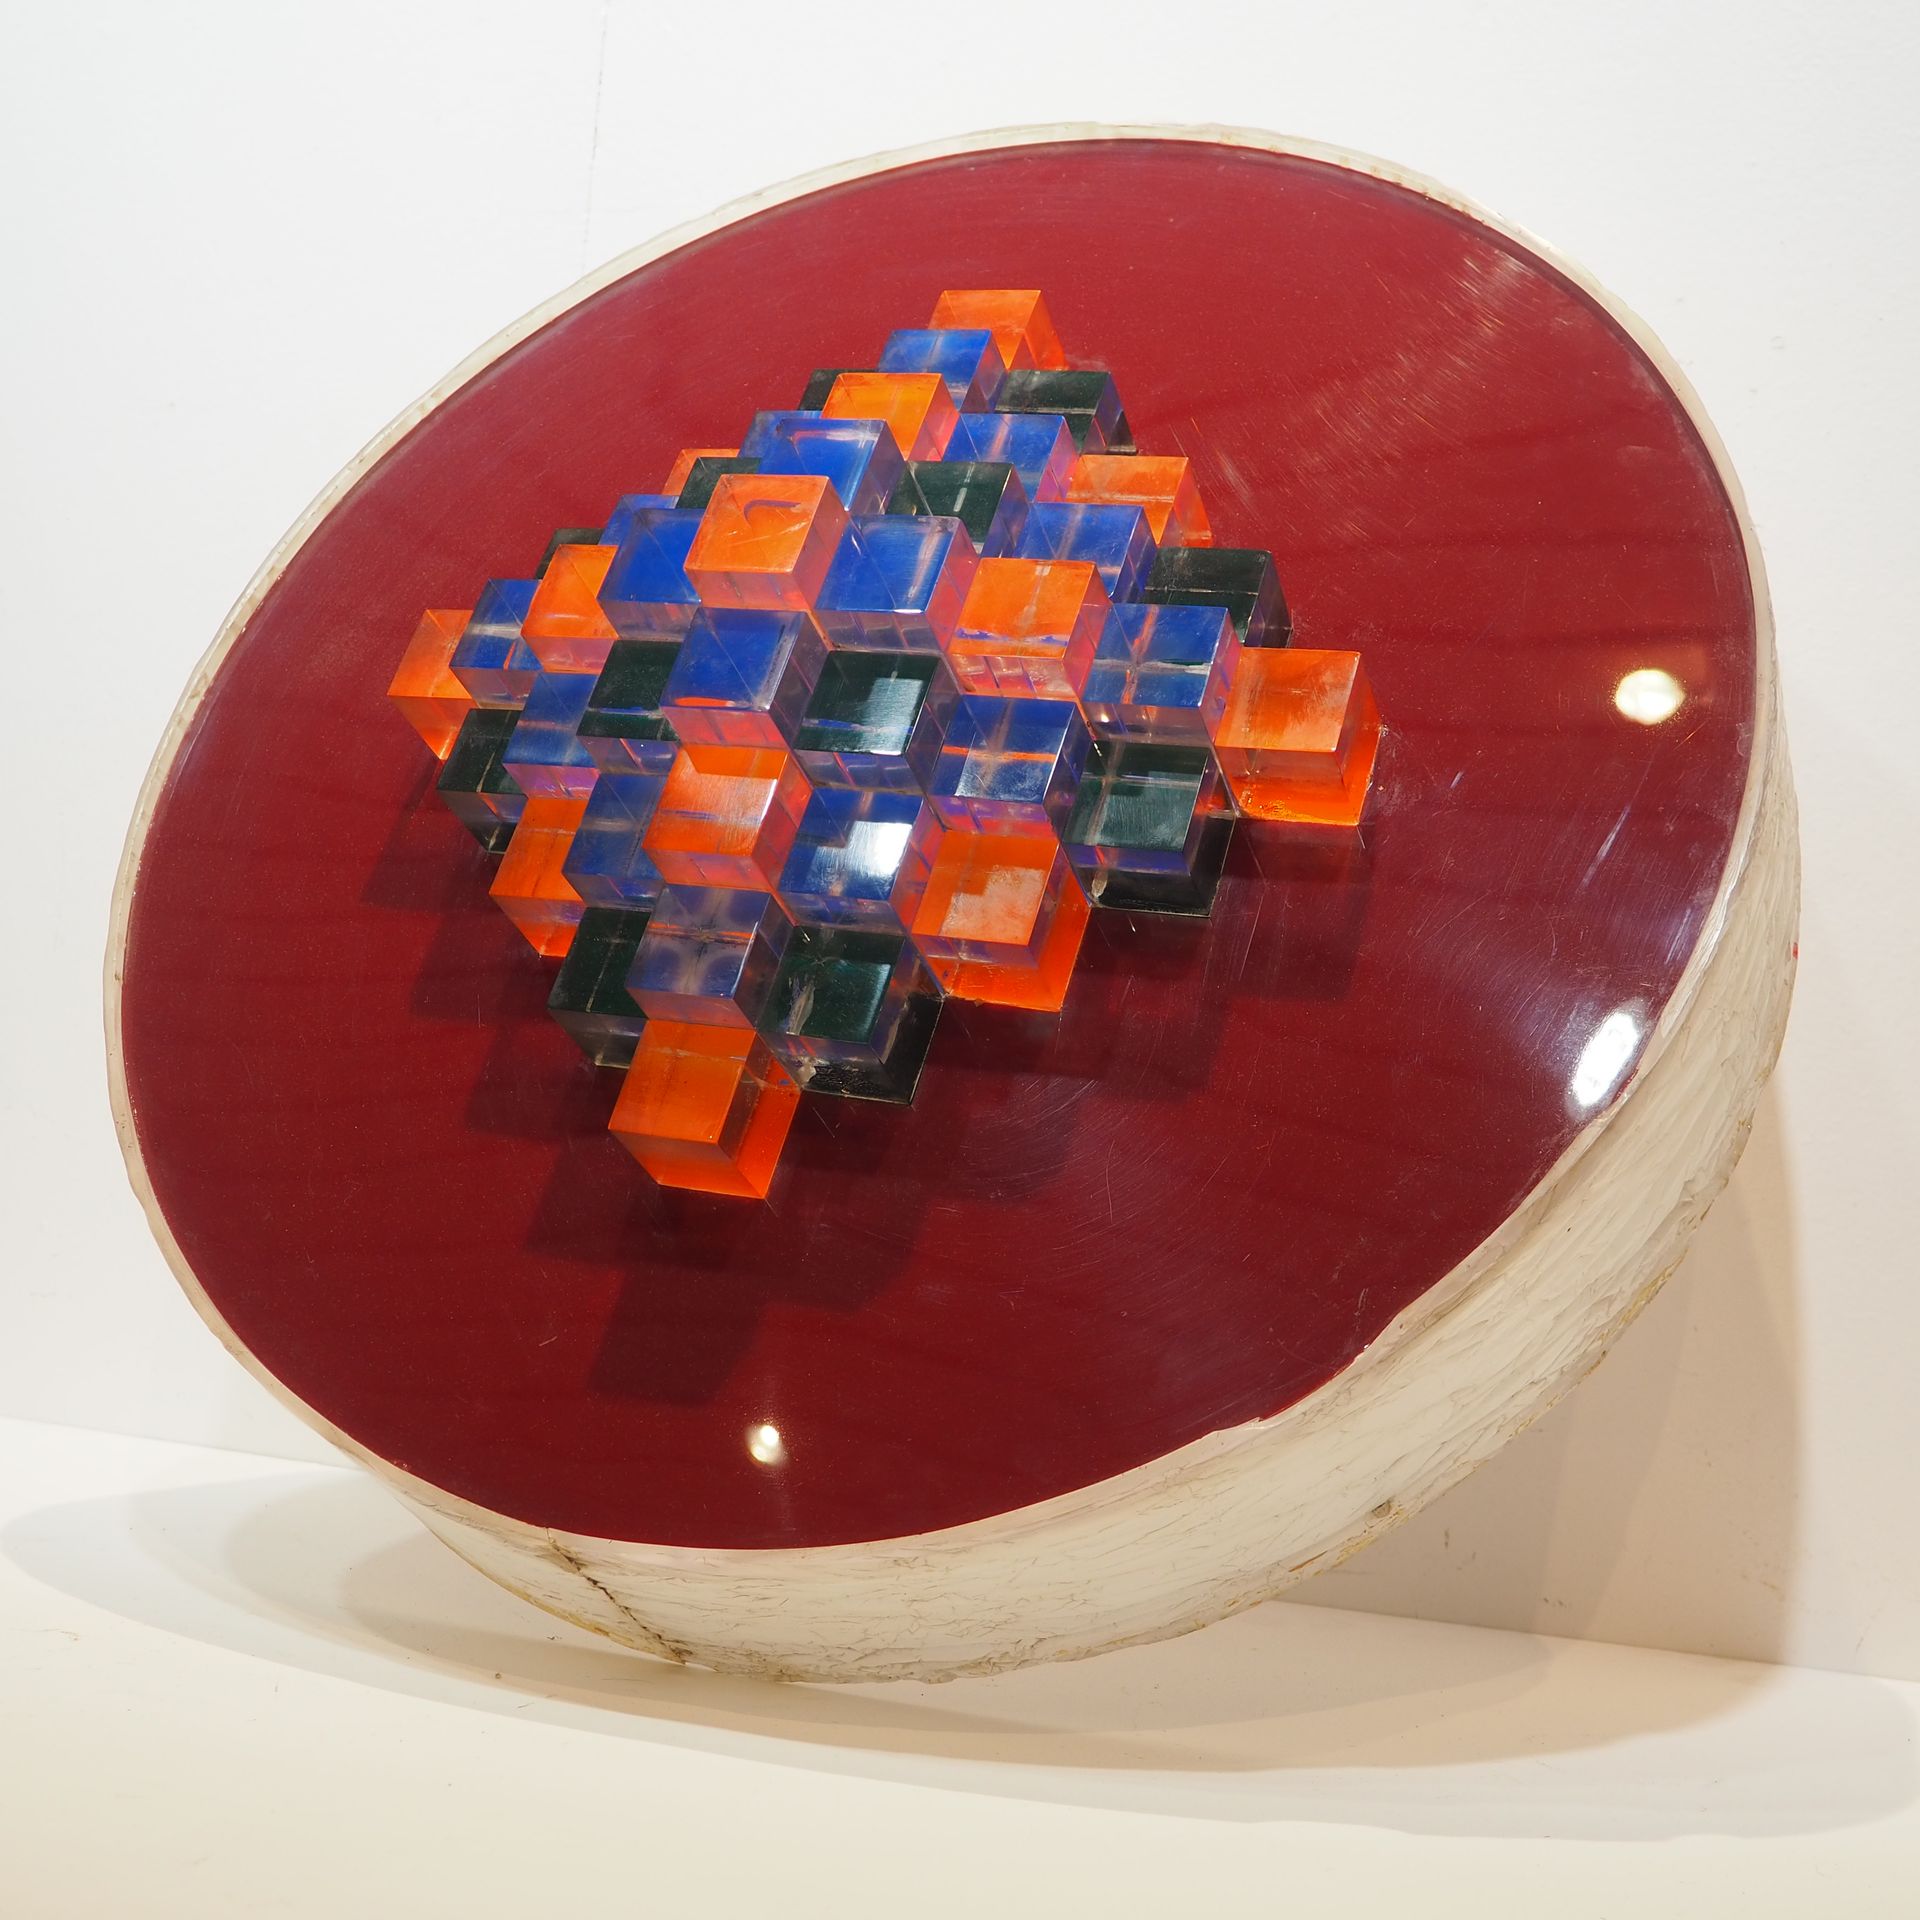 Null Kinetic art : Ceiling lamp around 1970, plexiglass made of coloured cubes, &hellip;